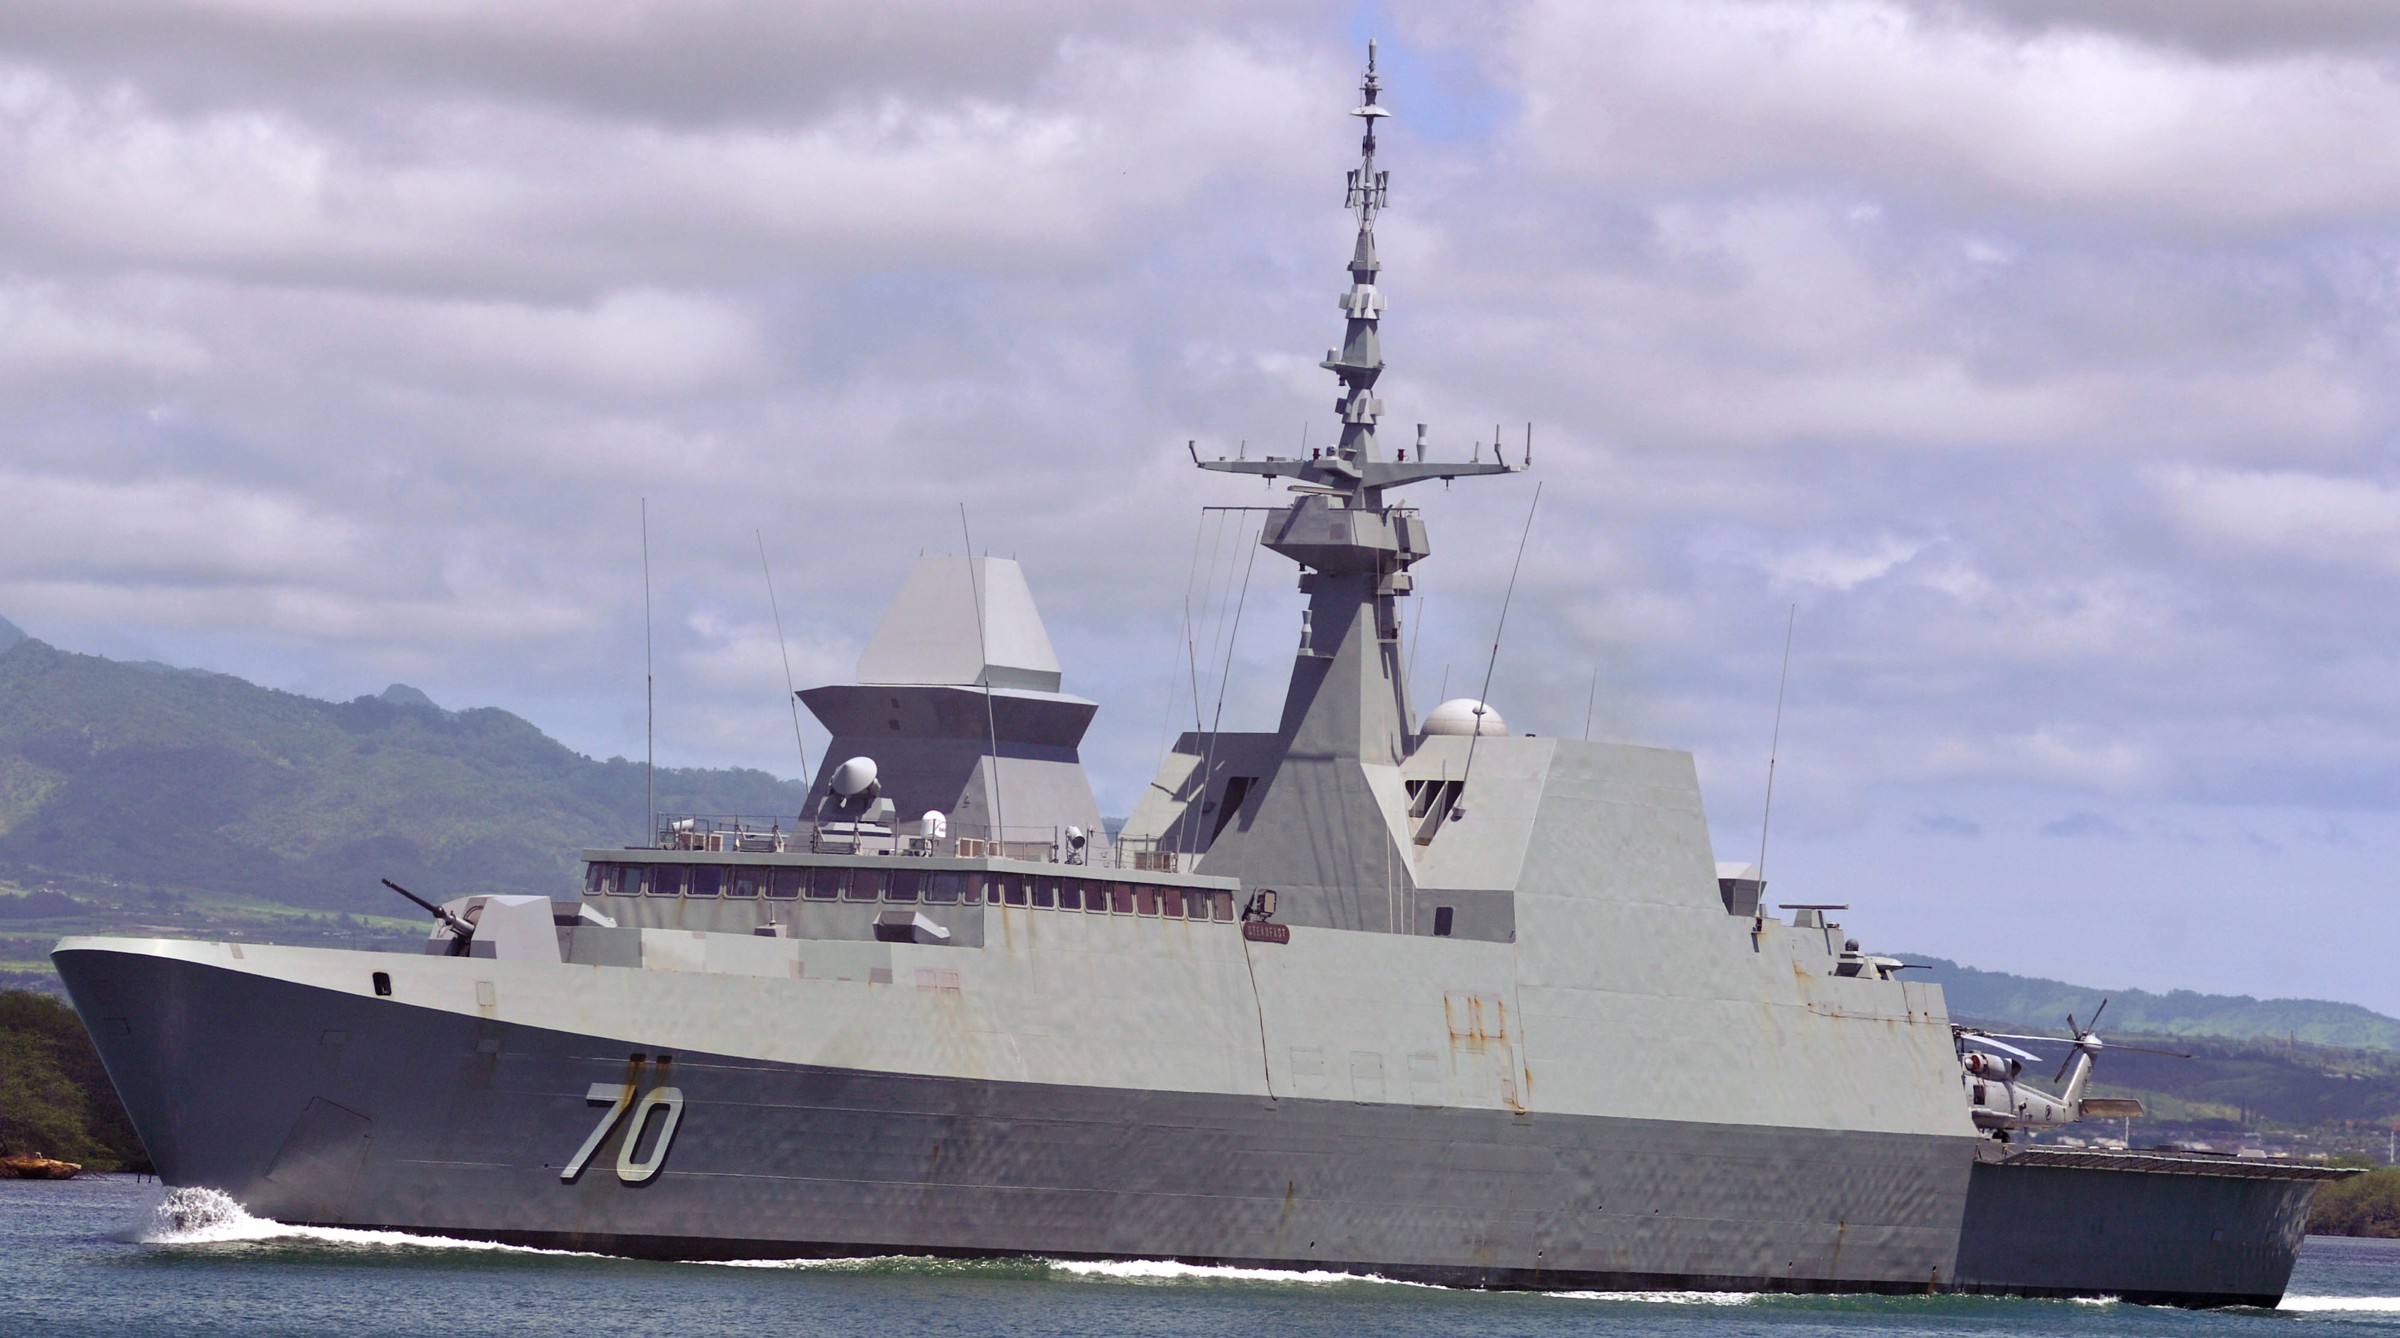 70 rss steadfast formidable class multi-mission missile frigate ffg republic singapore navy 12